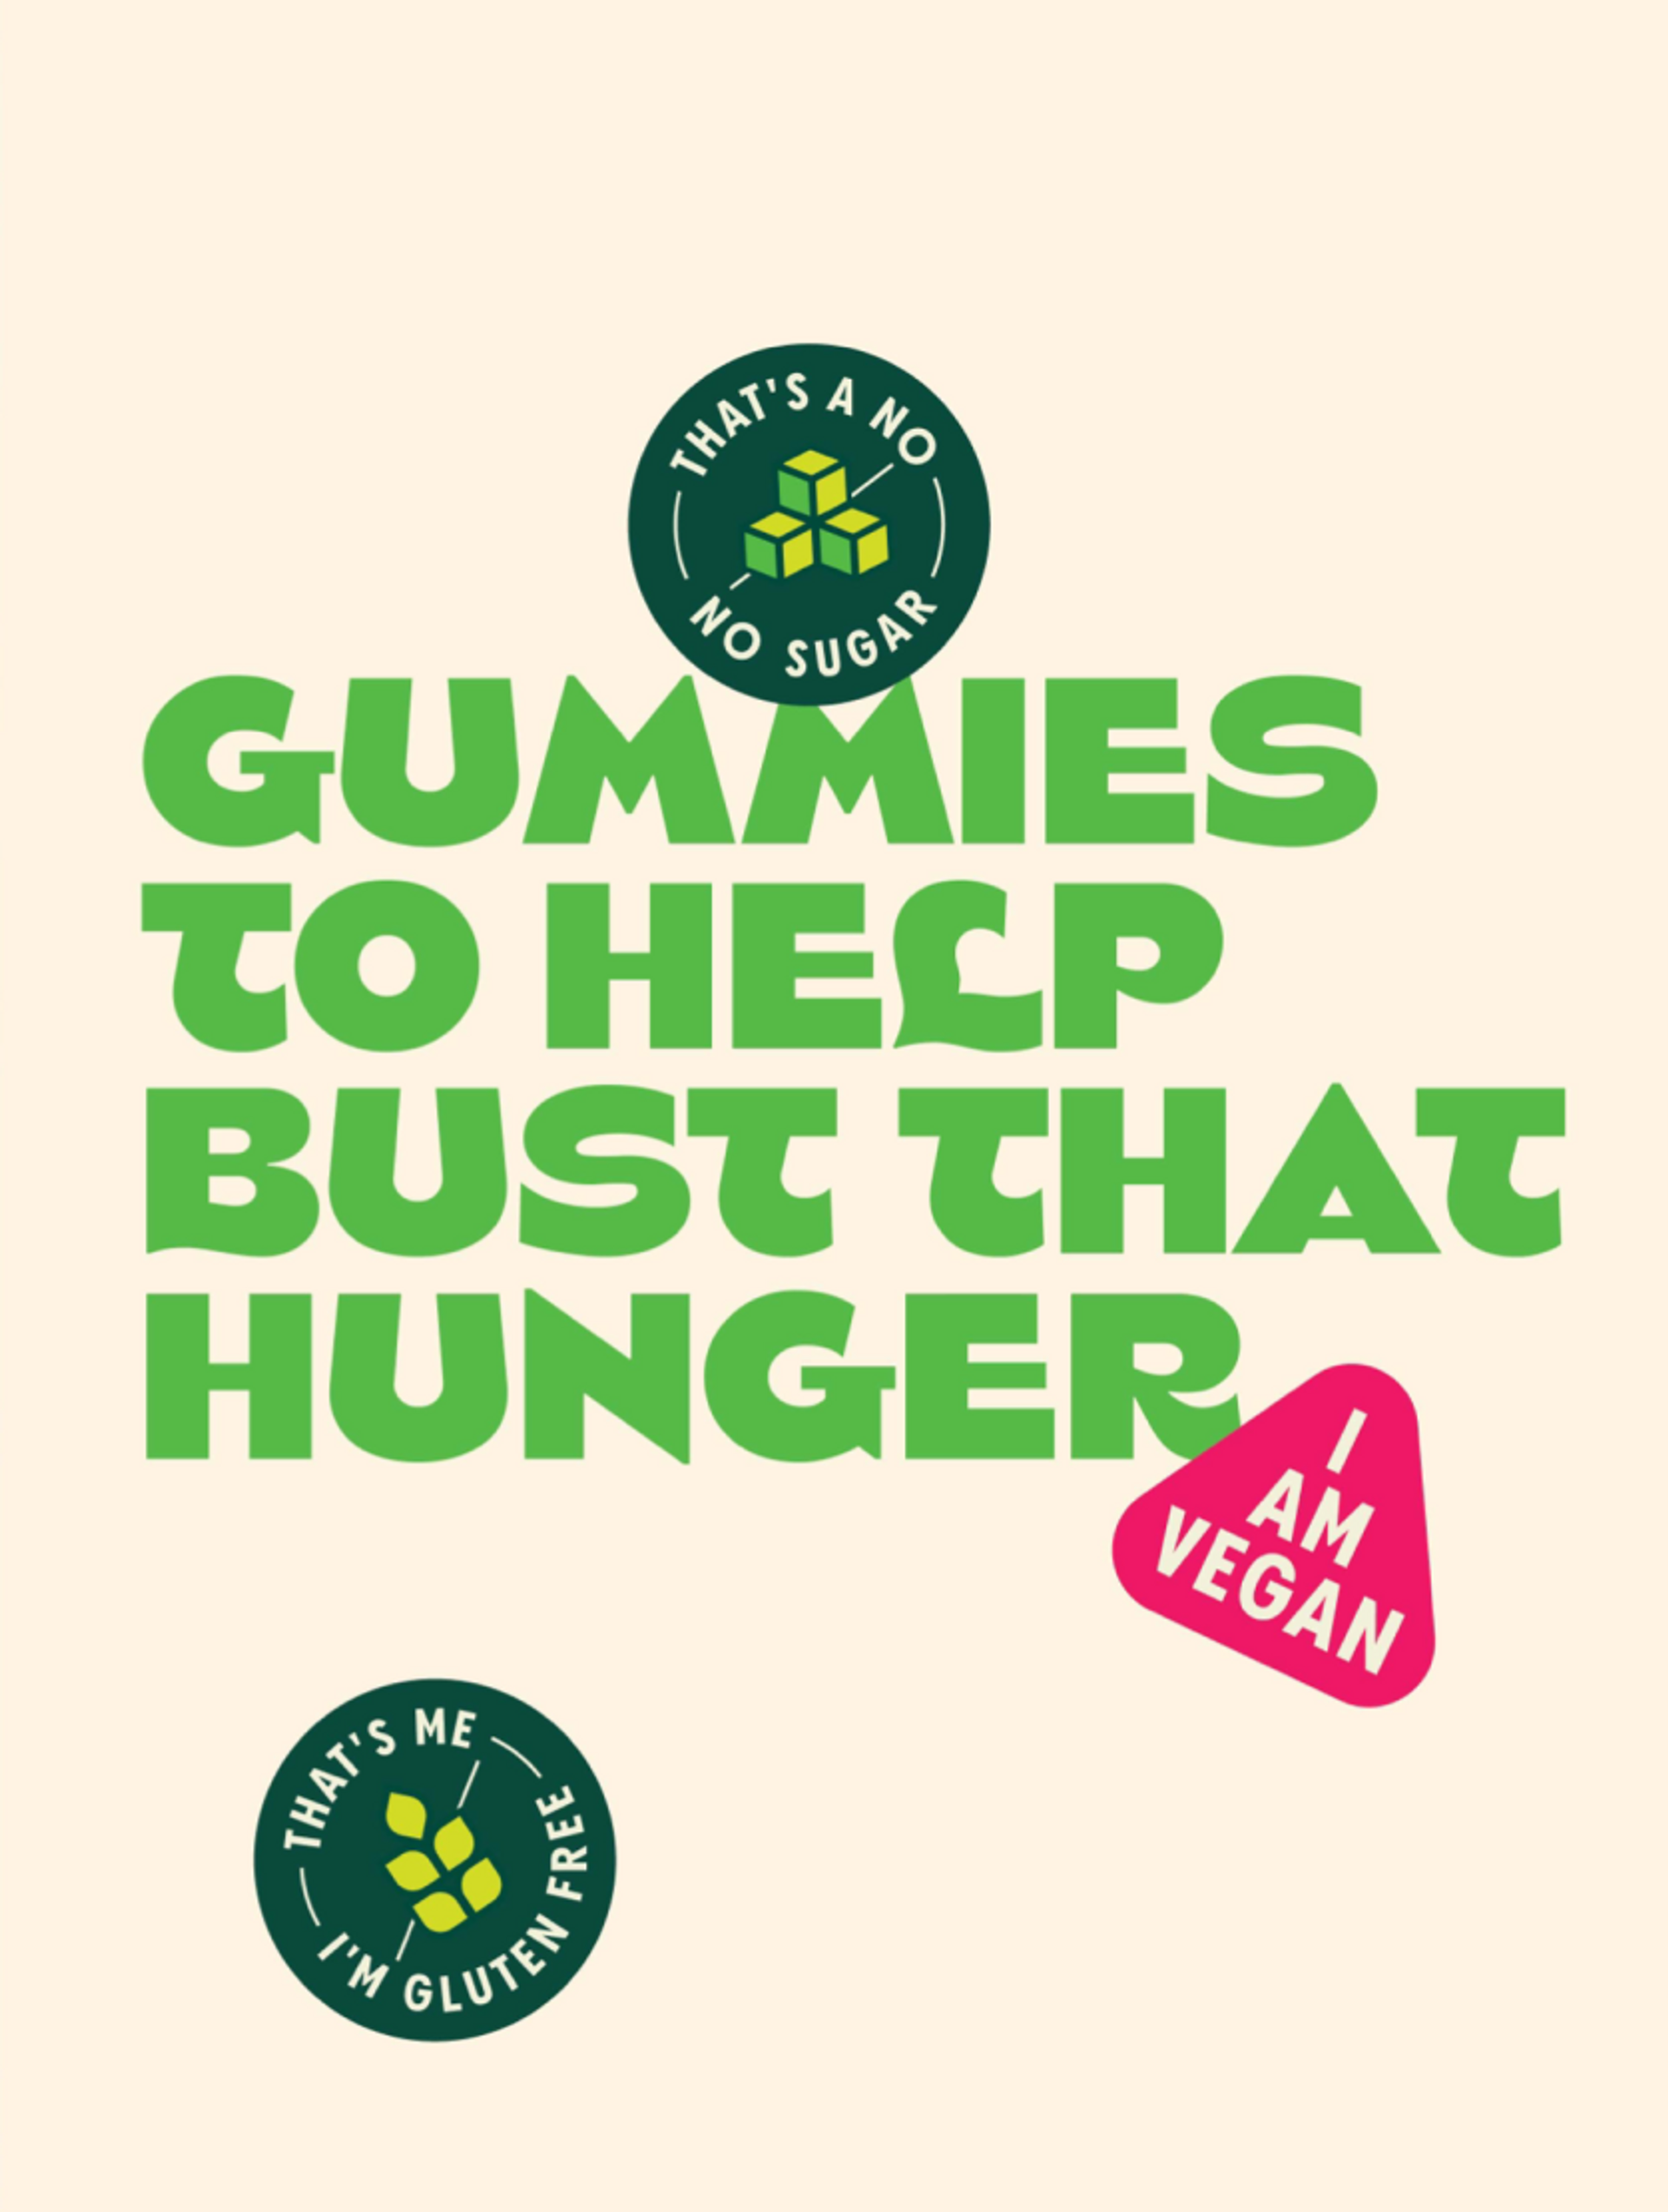 Portrait typography poster design for gummies brand by Our Revolution, featuring Our Hippie Co. branding slogan “Gummies to help bust that hunger” and fun illustrated symbols of product claims